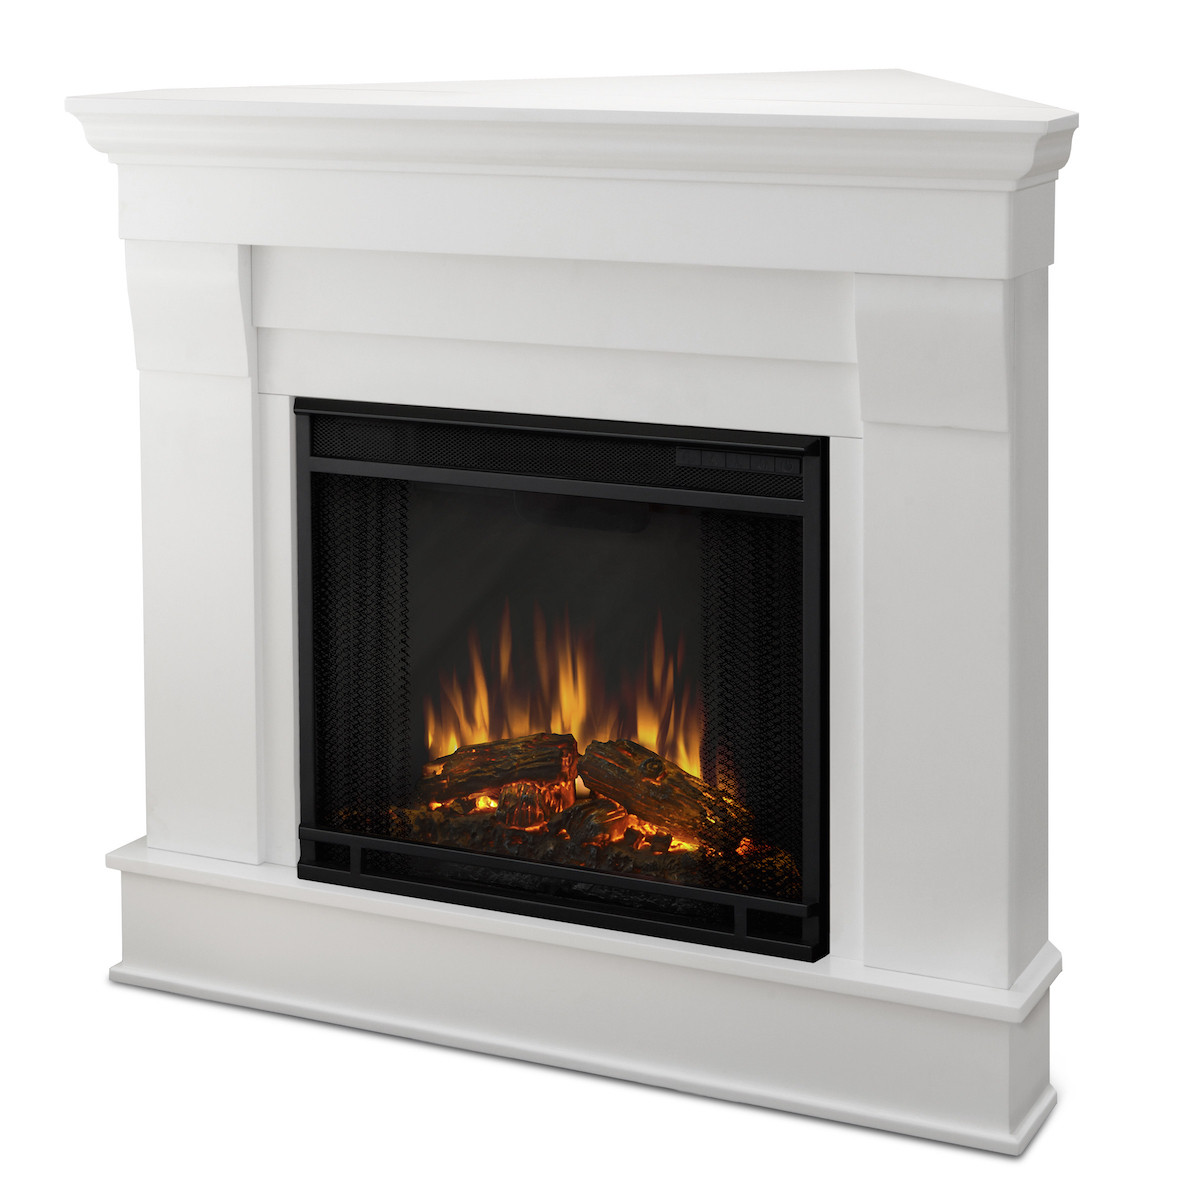 White Corner Electric Fireplace
 Real Flame Chateau Corner Electric Fireplace in White